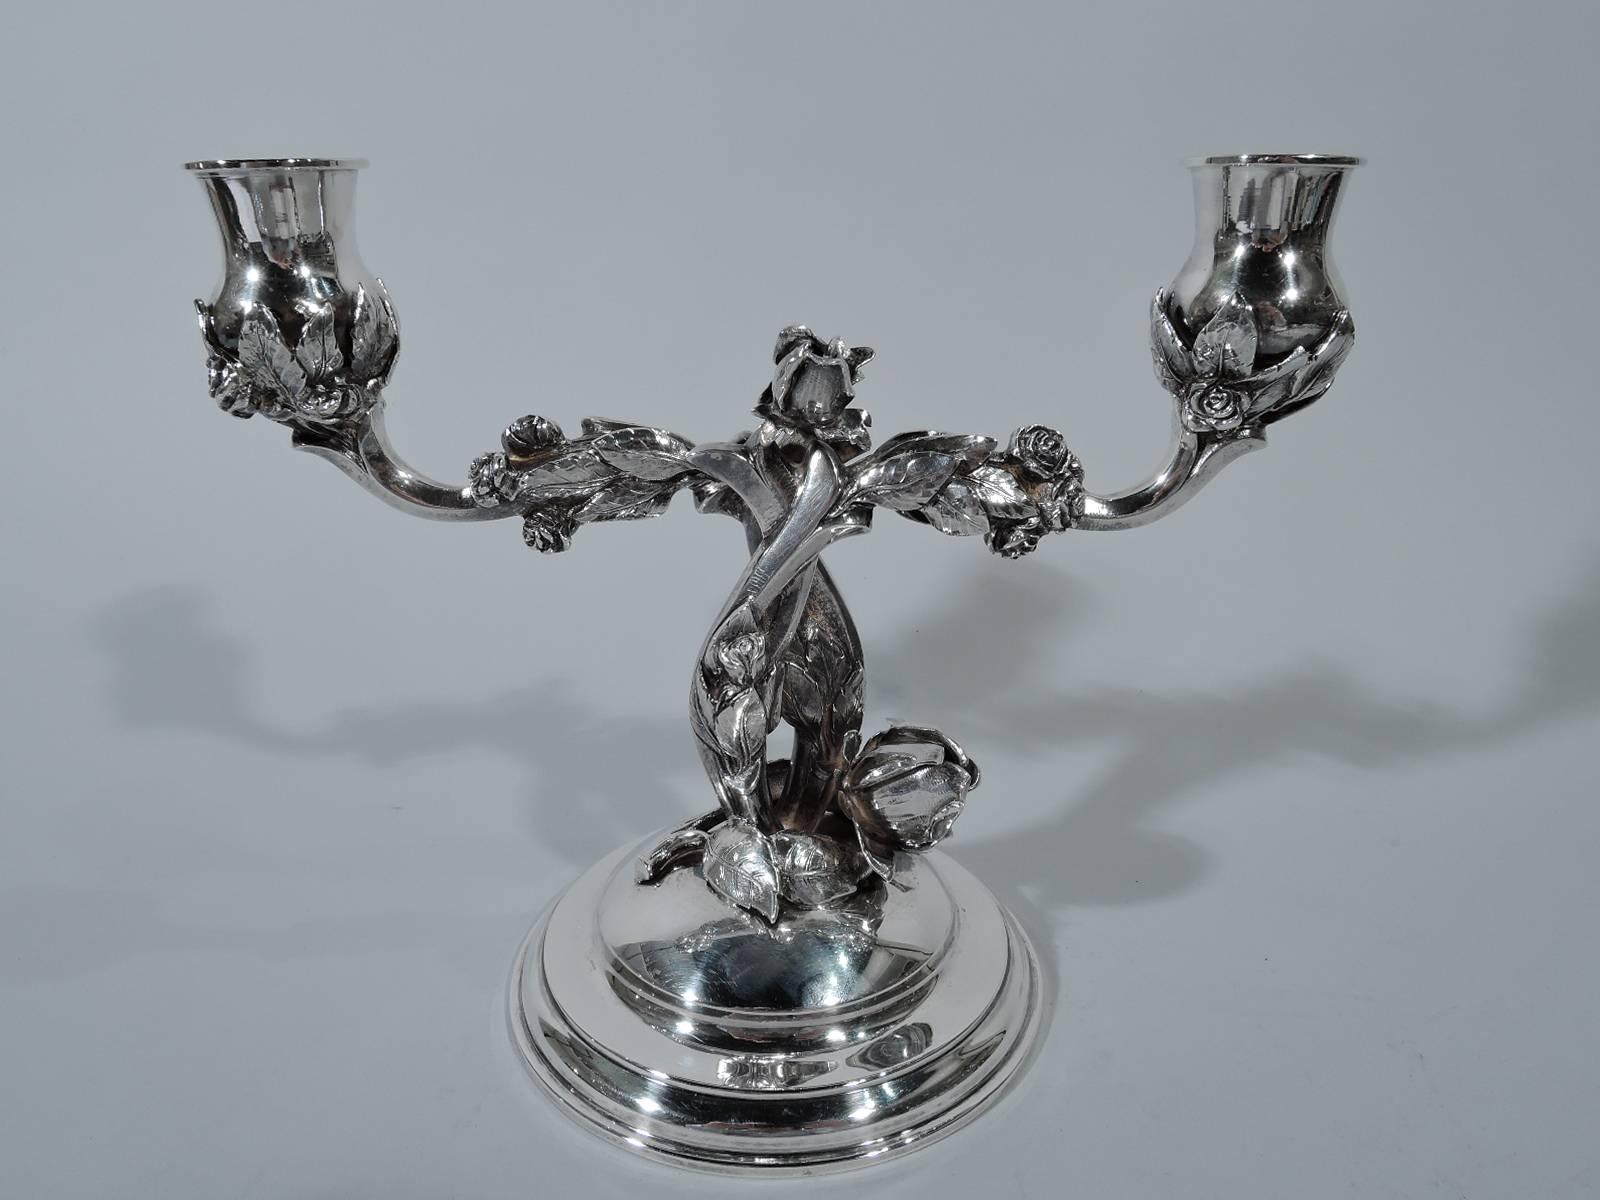 Pair of German sterling silver two-light candelabra. Stepped and domed base to which are mounted two entwined rose branches, each terminating in plain single socket. Tactile and irregular leaves and blossoms. Marks include Ott-Heydendahl Wiesbaden